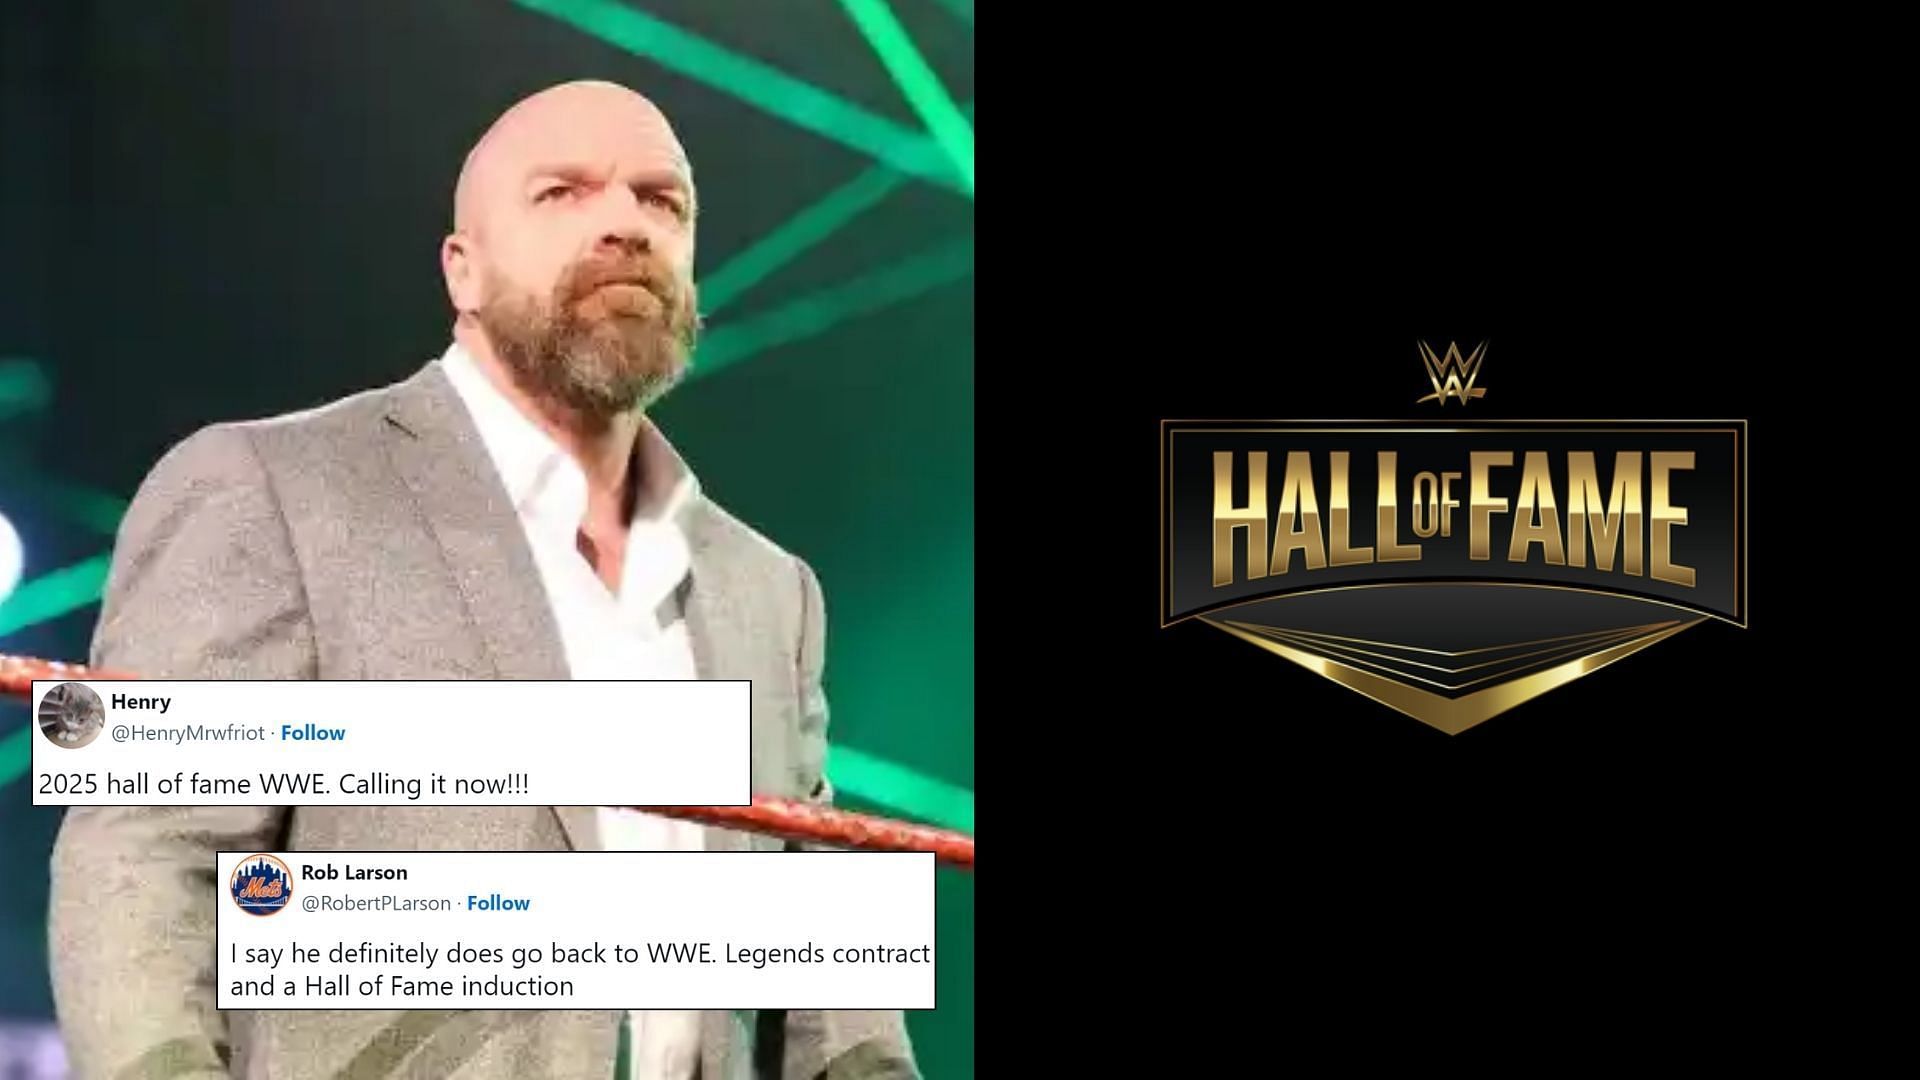 Triple H is the Chief Content Officer and Head of Creative in WWE